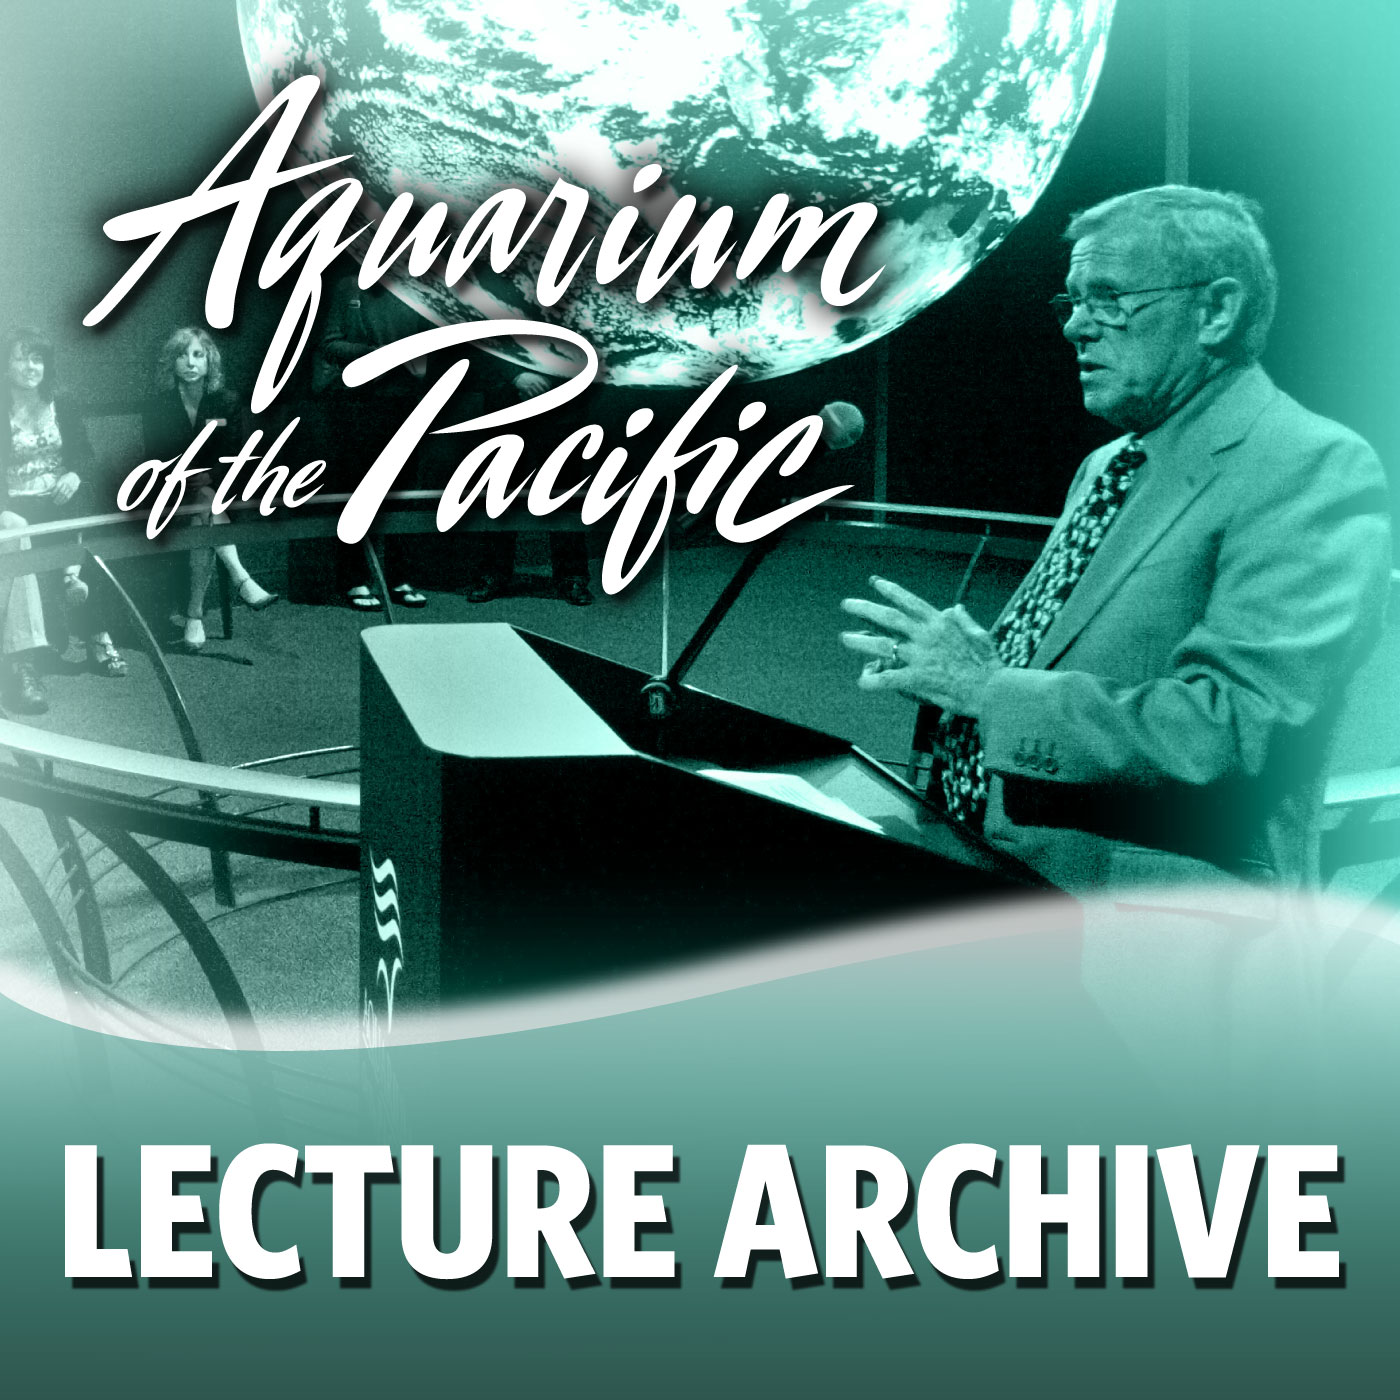 Lecture Archive 2014 Podcast artwork